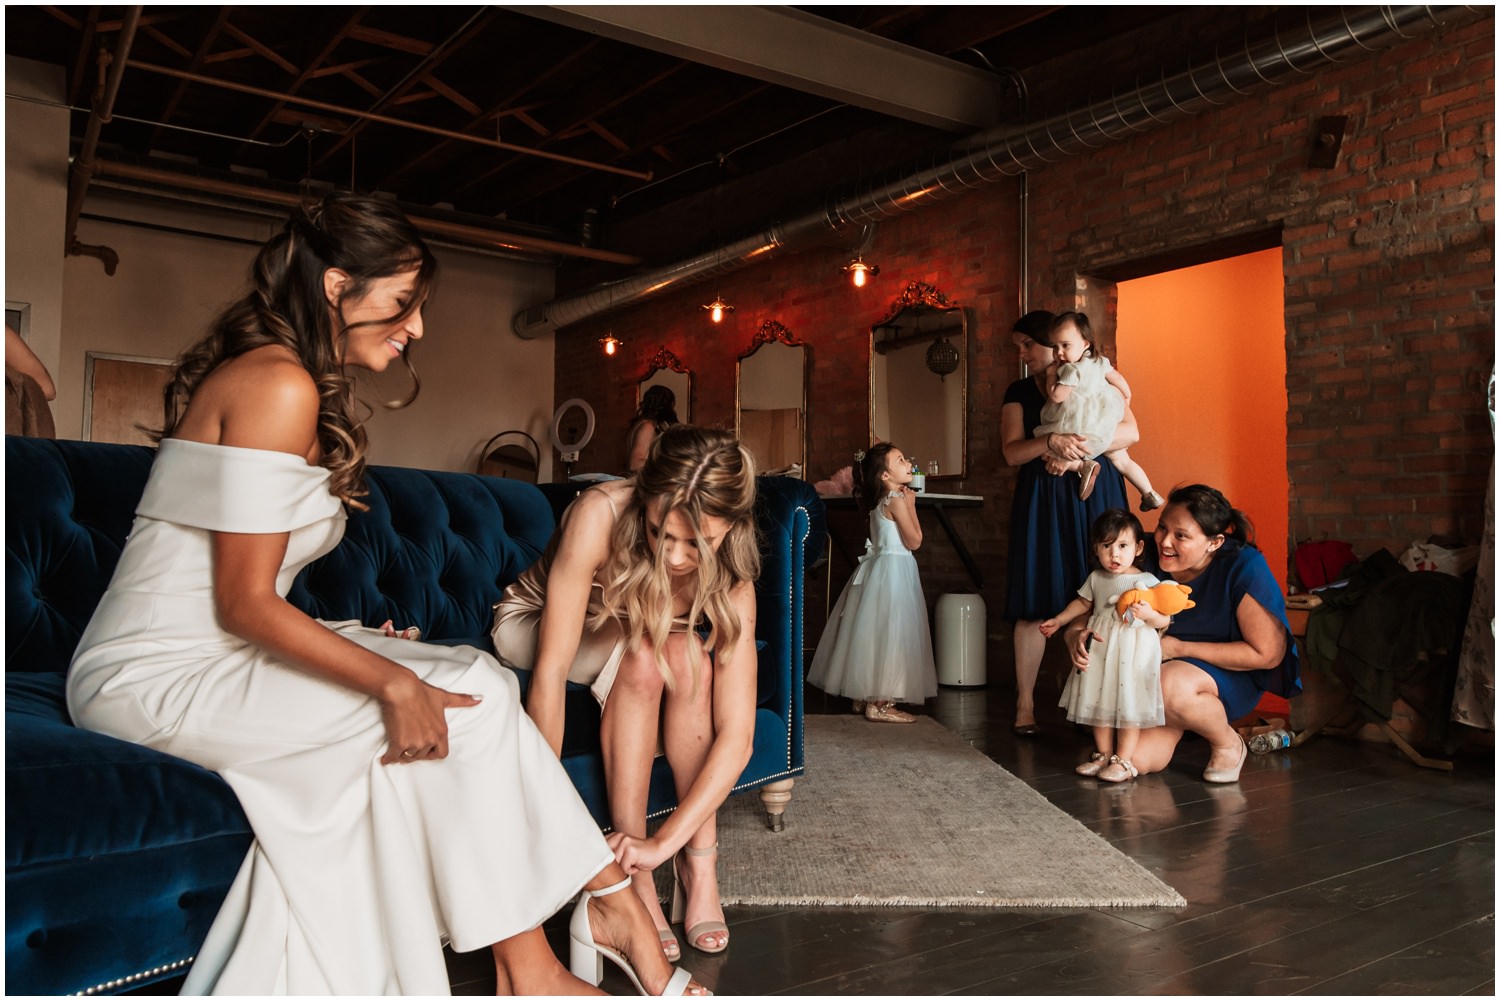 Fairlie Chicago Wedding getting ready bridesmaids helping bride to get ready. documentary photo